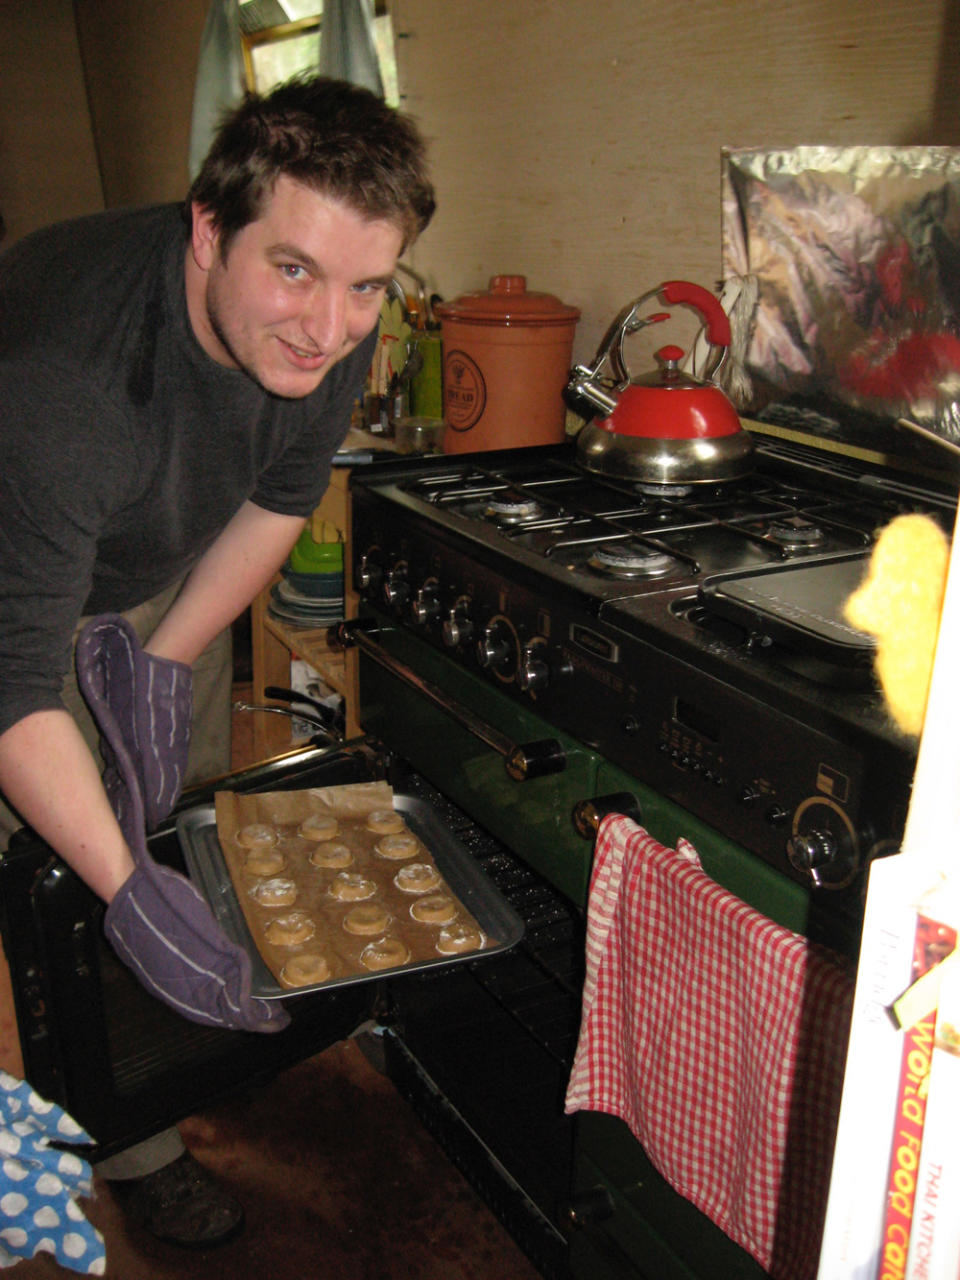 Matt baking in their narrowboat in March 2021 (Collect/PA Real Life)